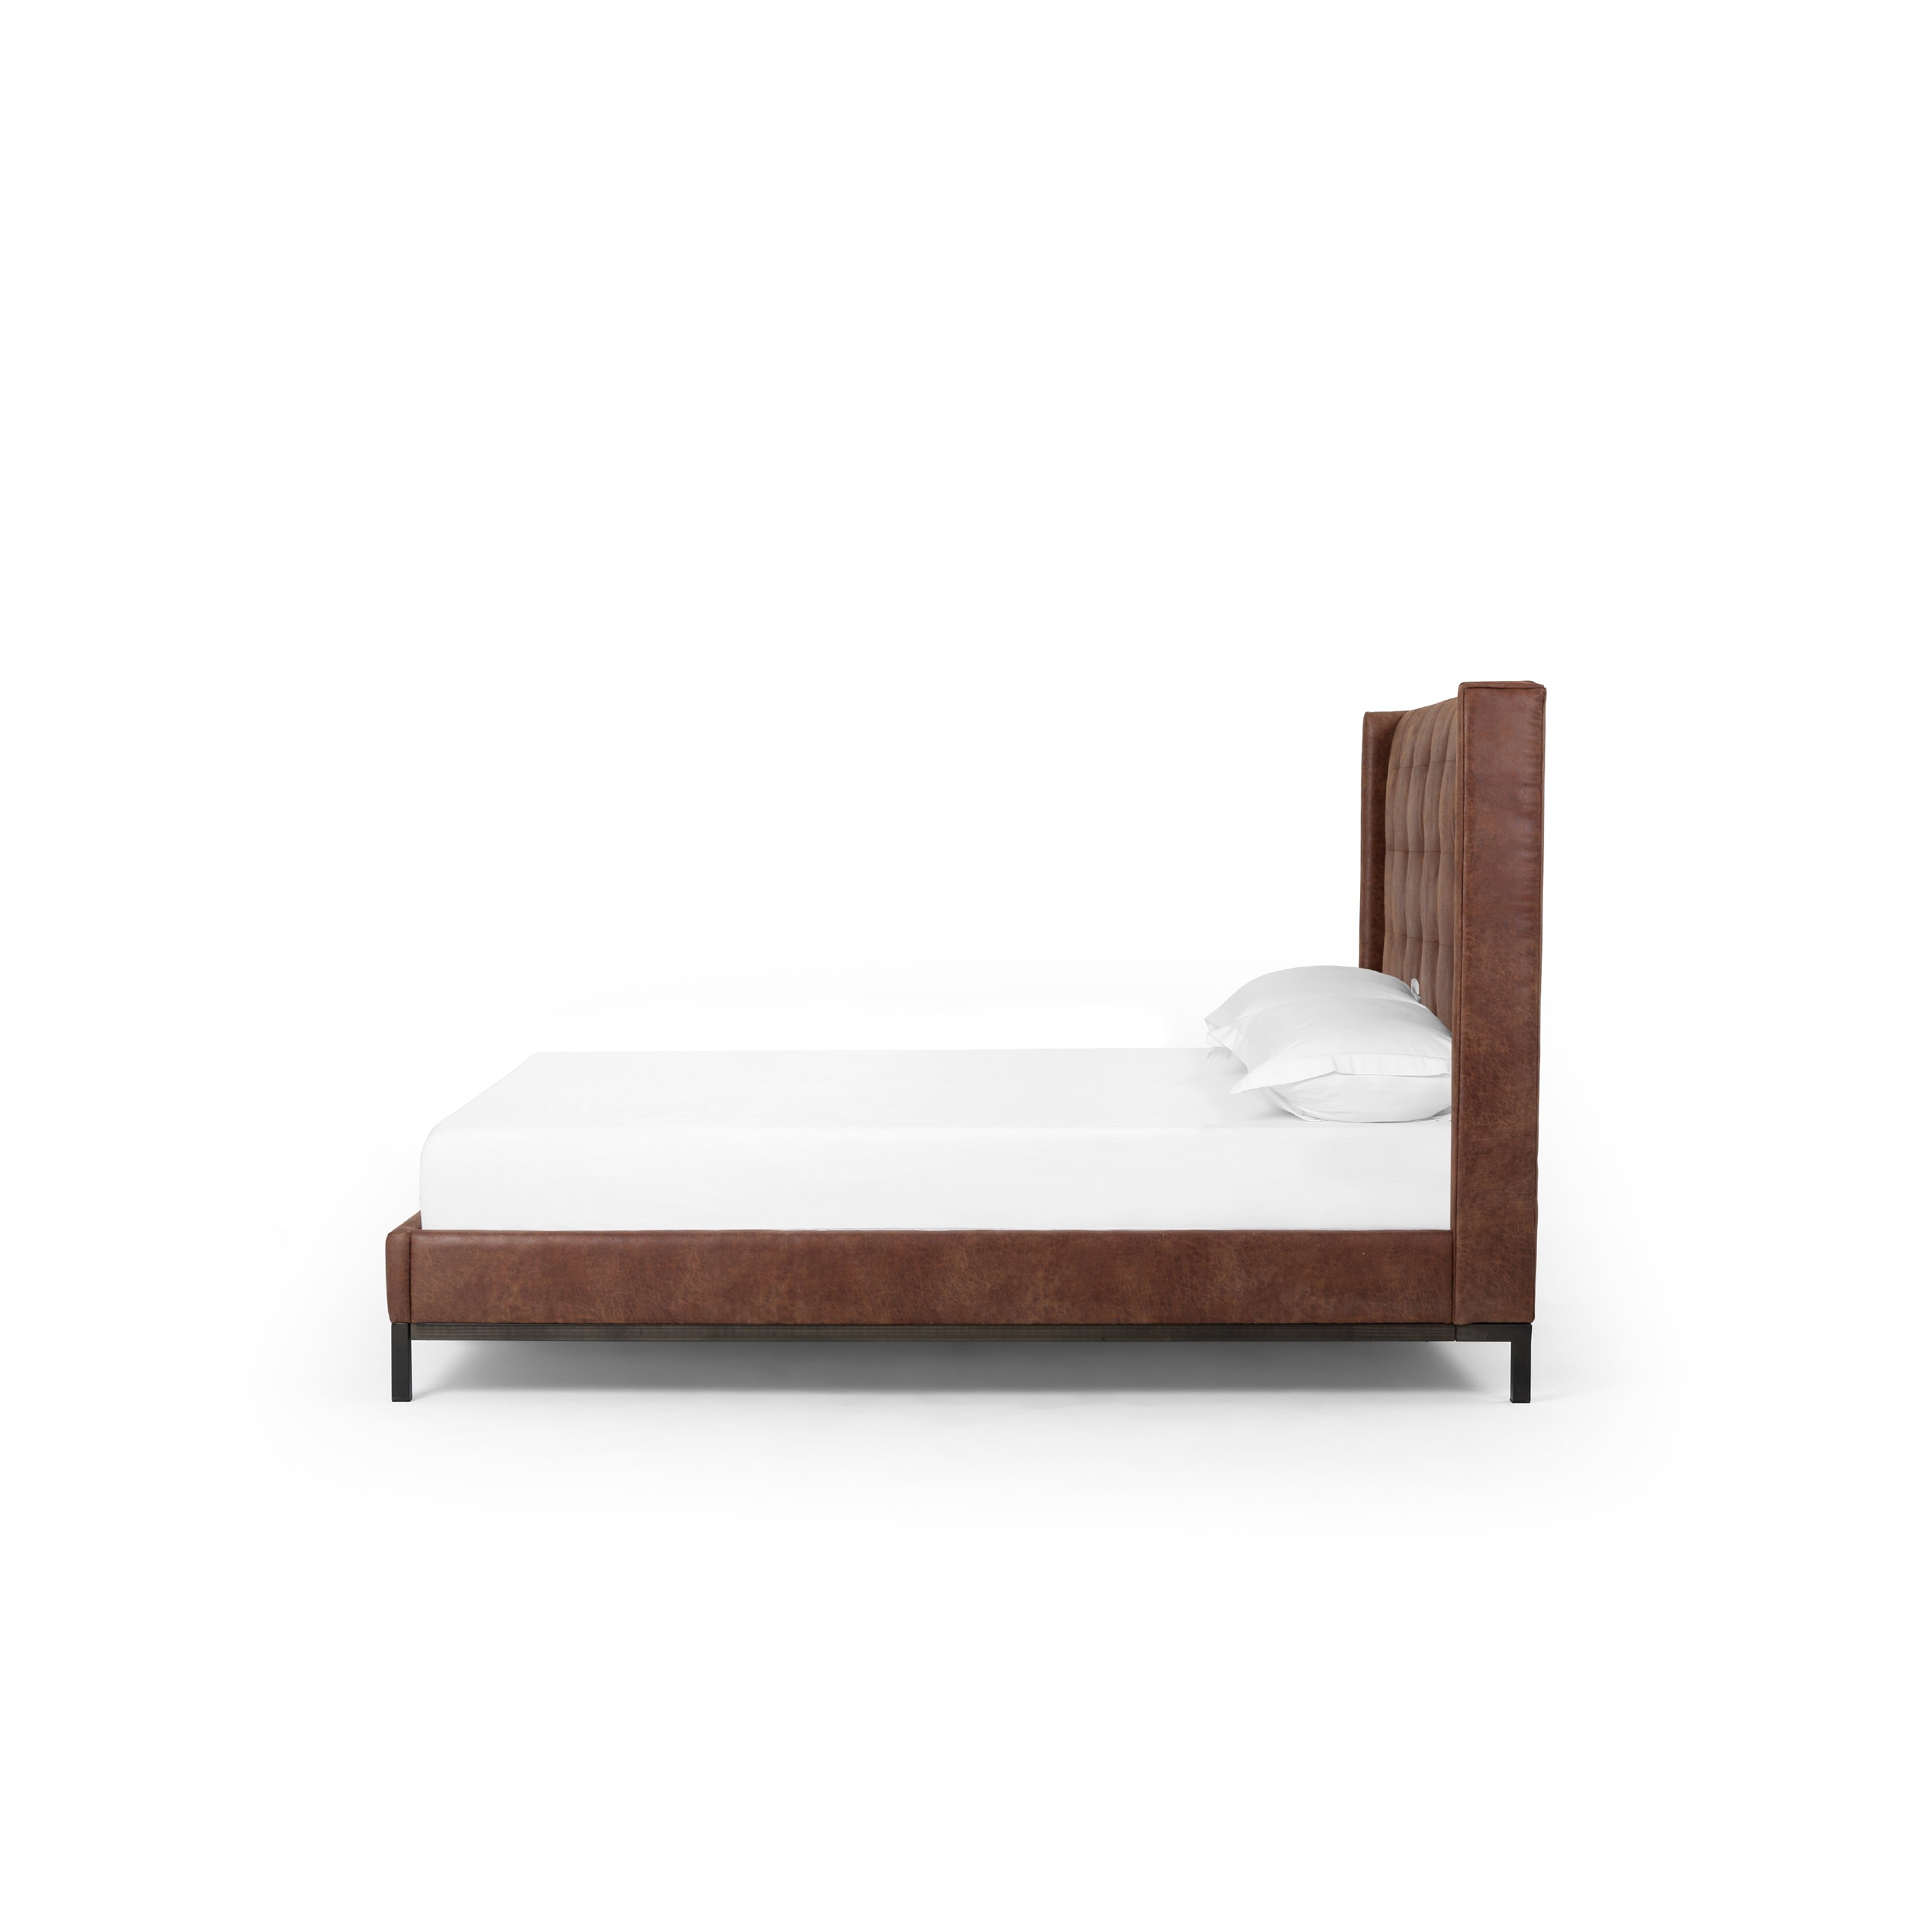 Newhall Bed - 55" - Vintage Tobacco - Image 3